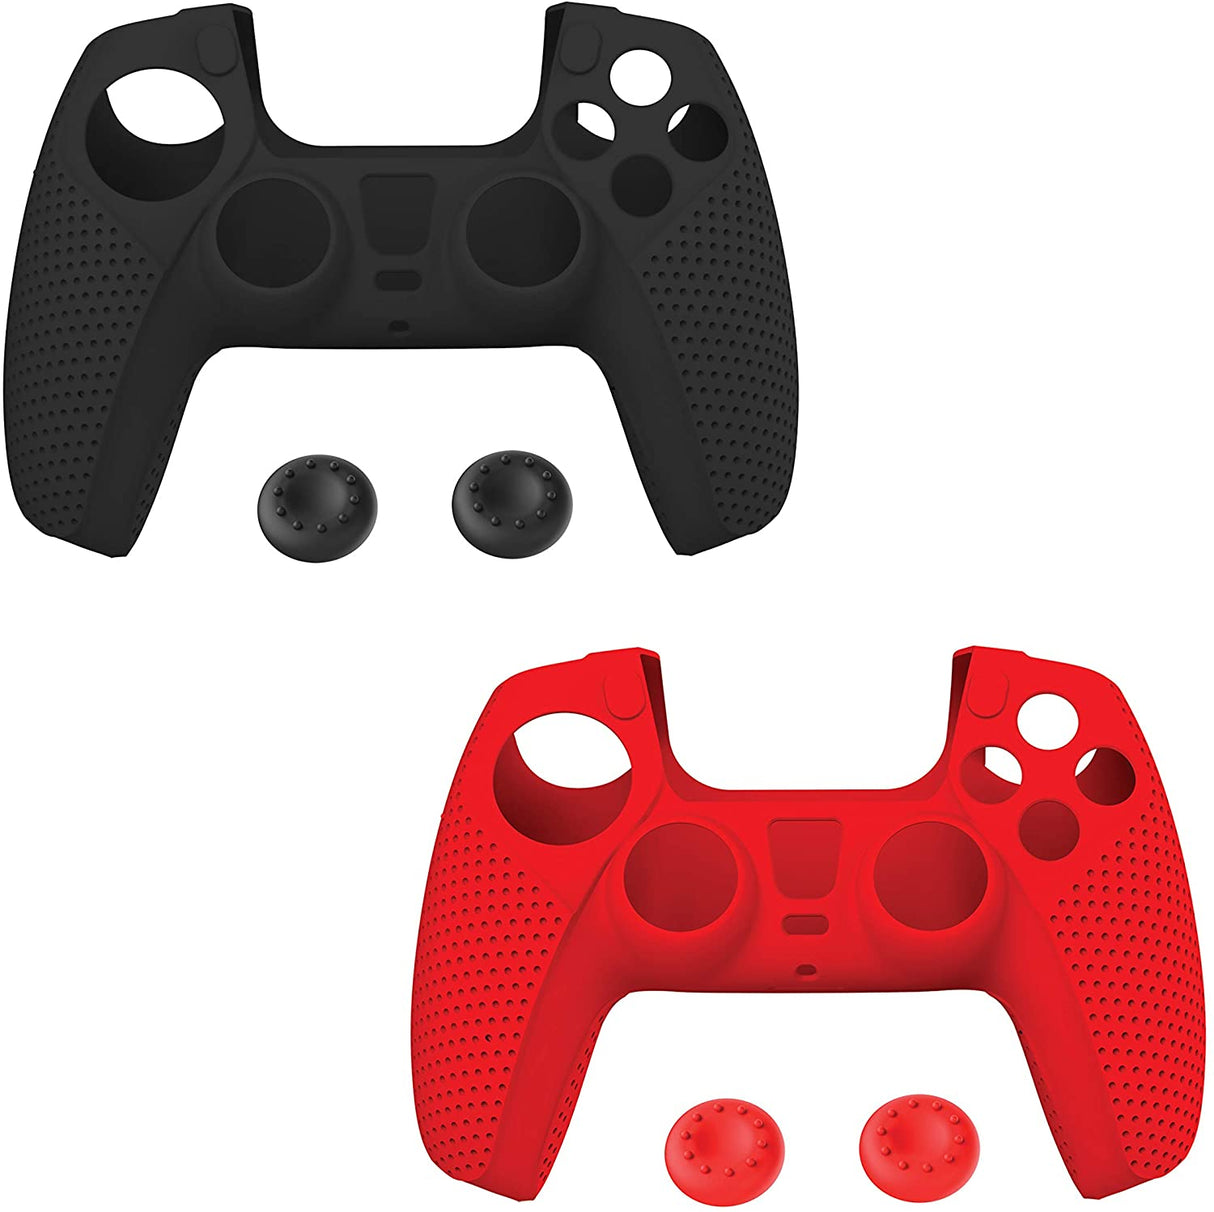 Verbatim Anti-Slip Silicone Skin Protective Cover for use with Playstation® 5 DualSense™ Wireless Controllers – 2pk – Black, Red